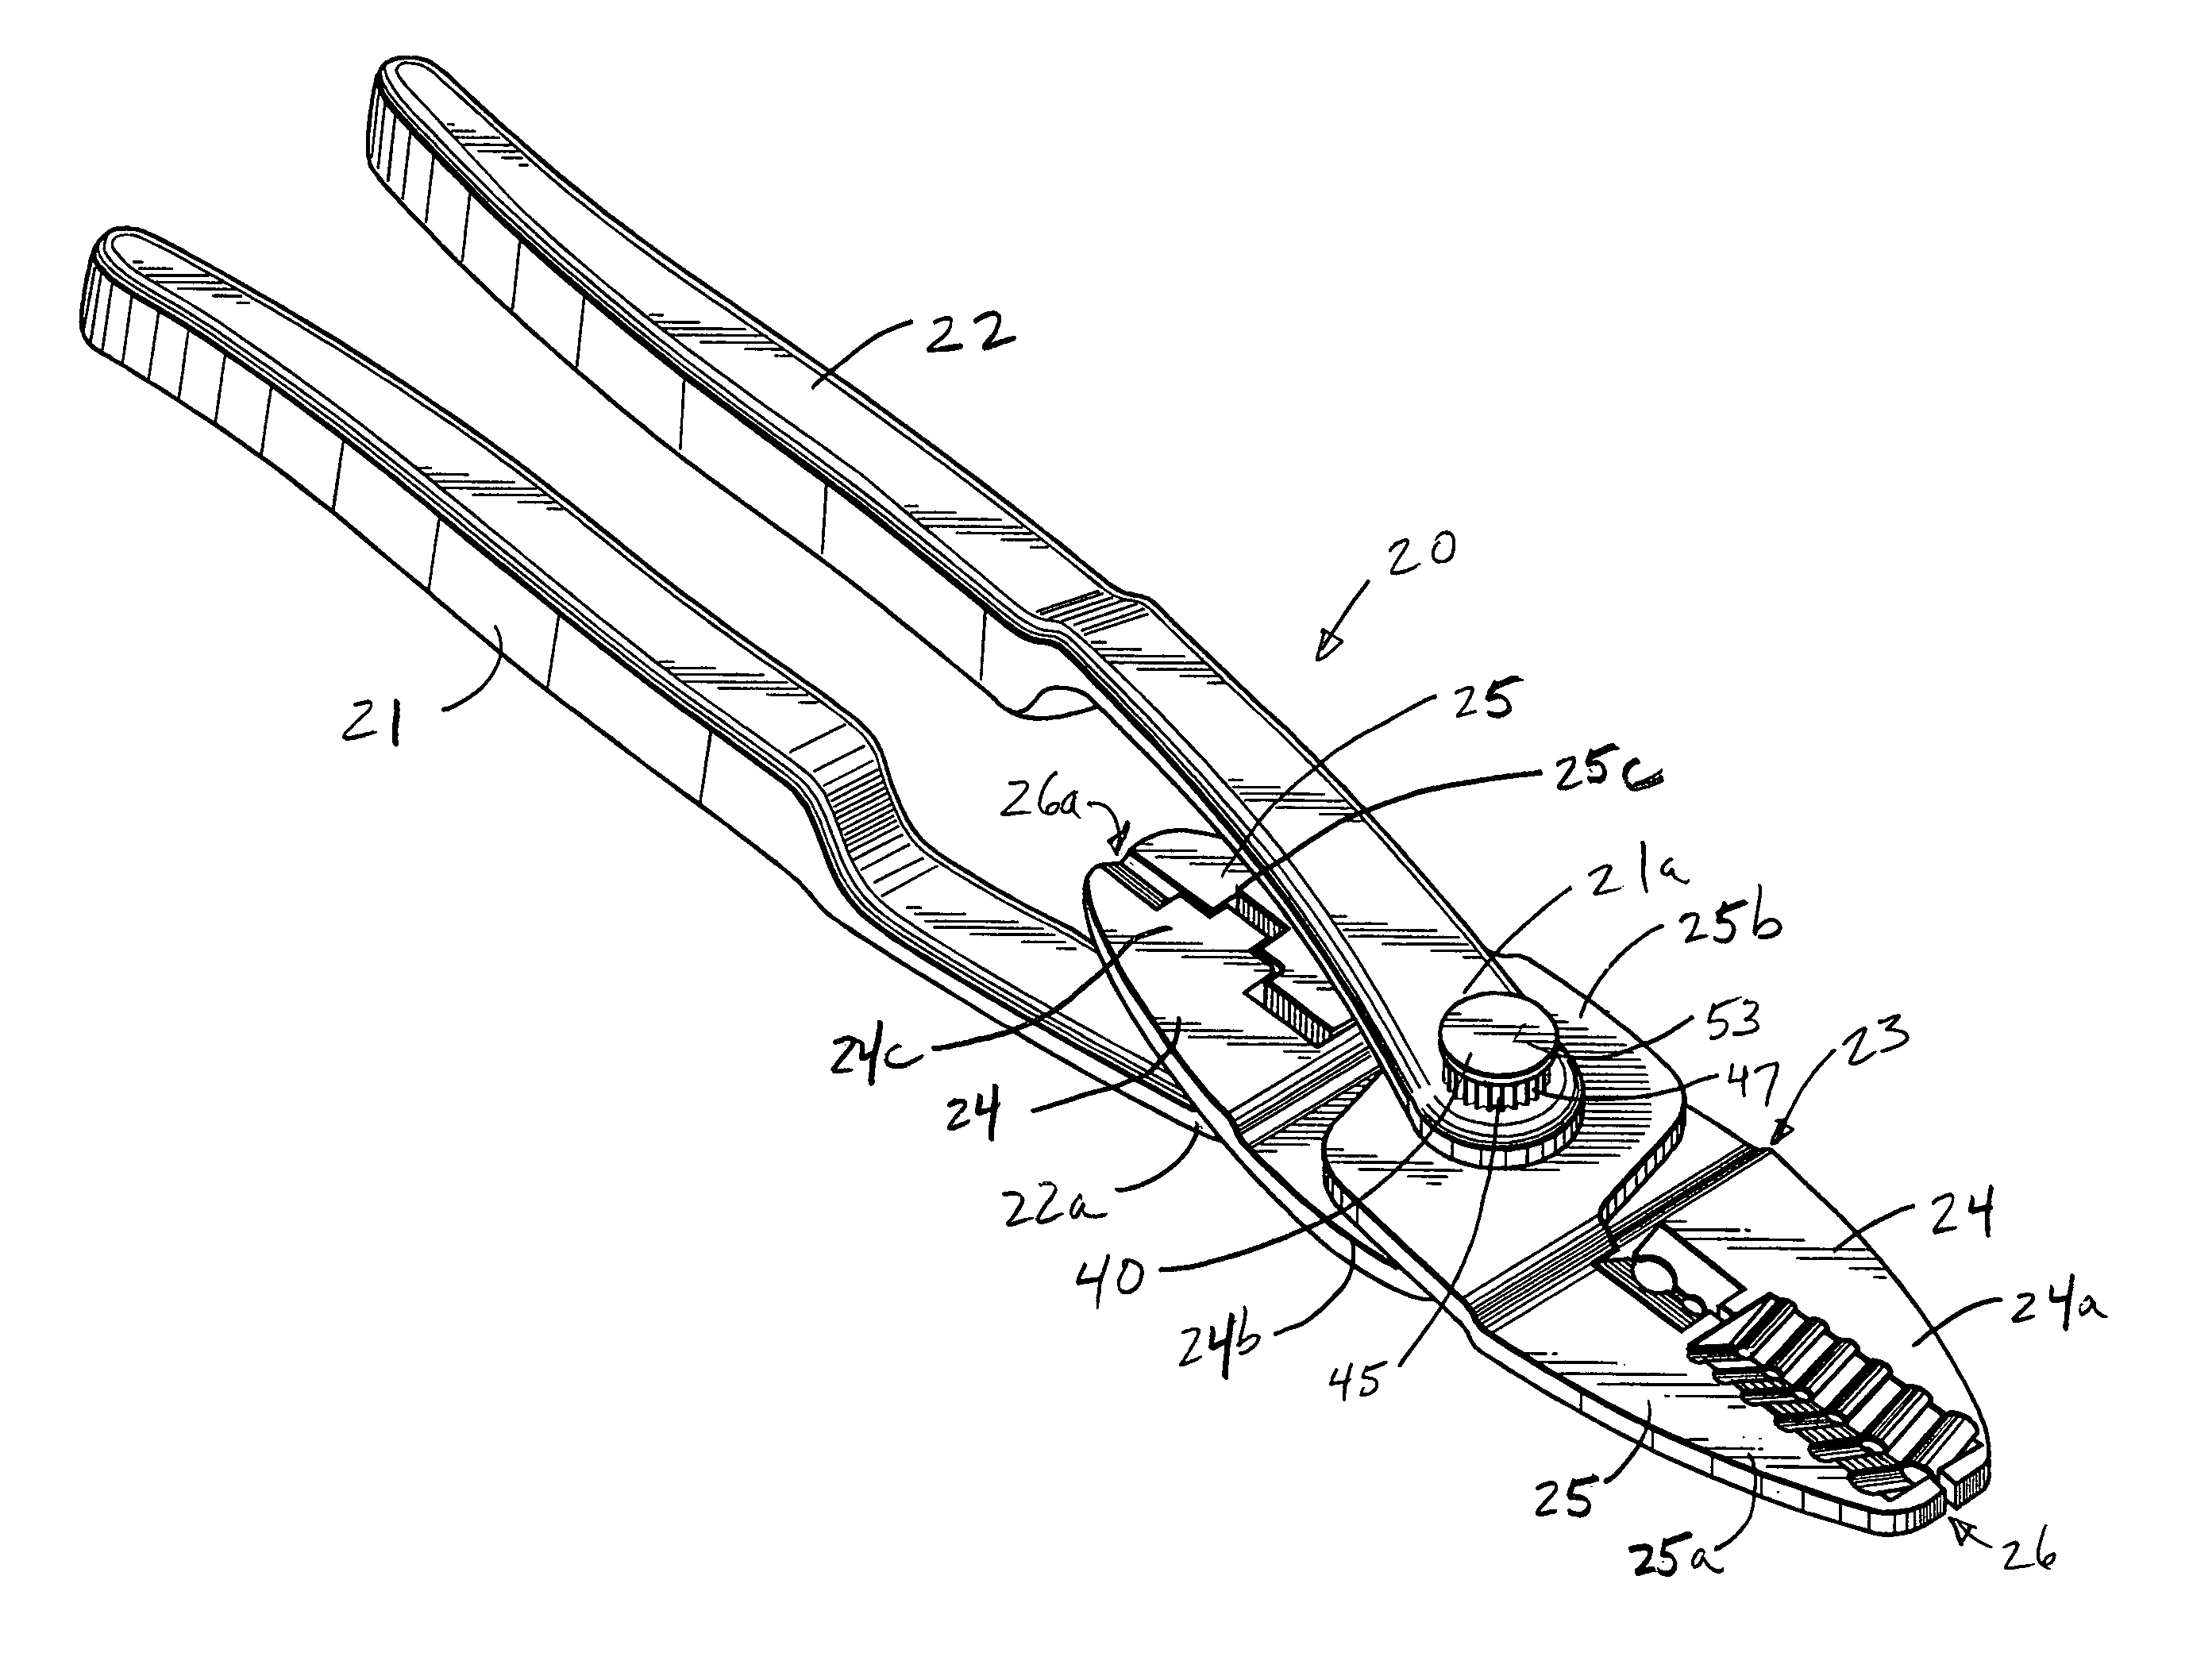 Indexable pliers-type tool